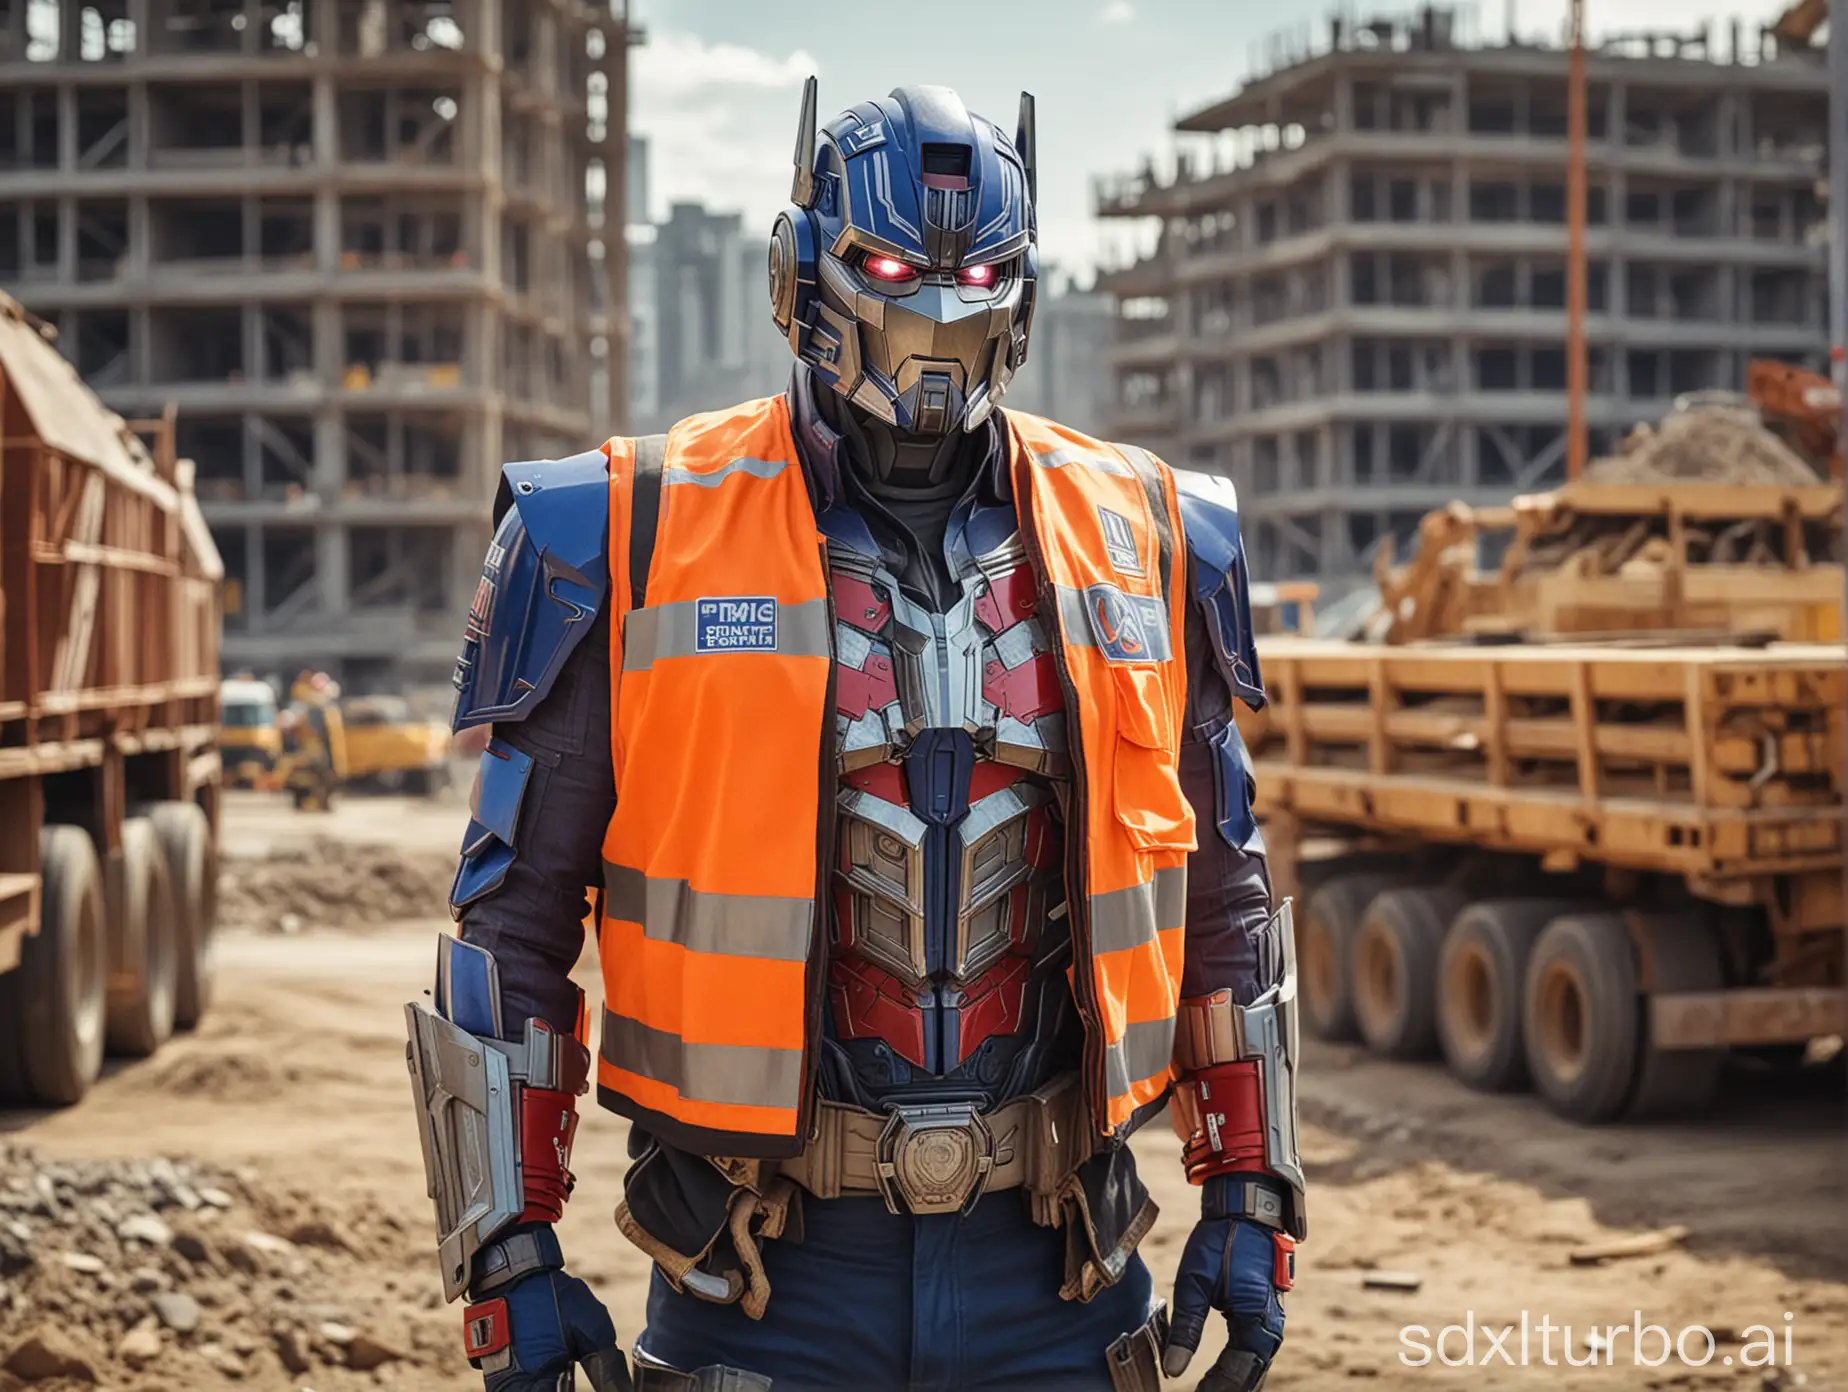 Optimus Prime, wearing a safety helmet and a work vest, is at a construction site.